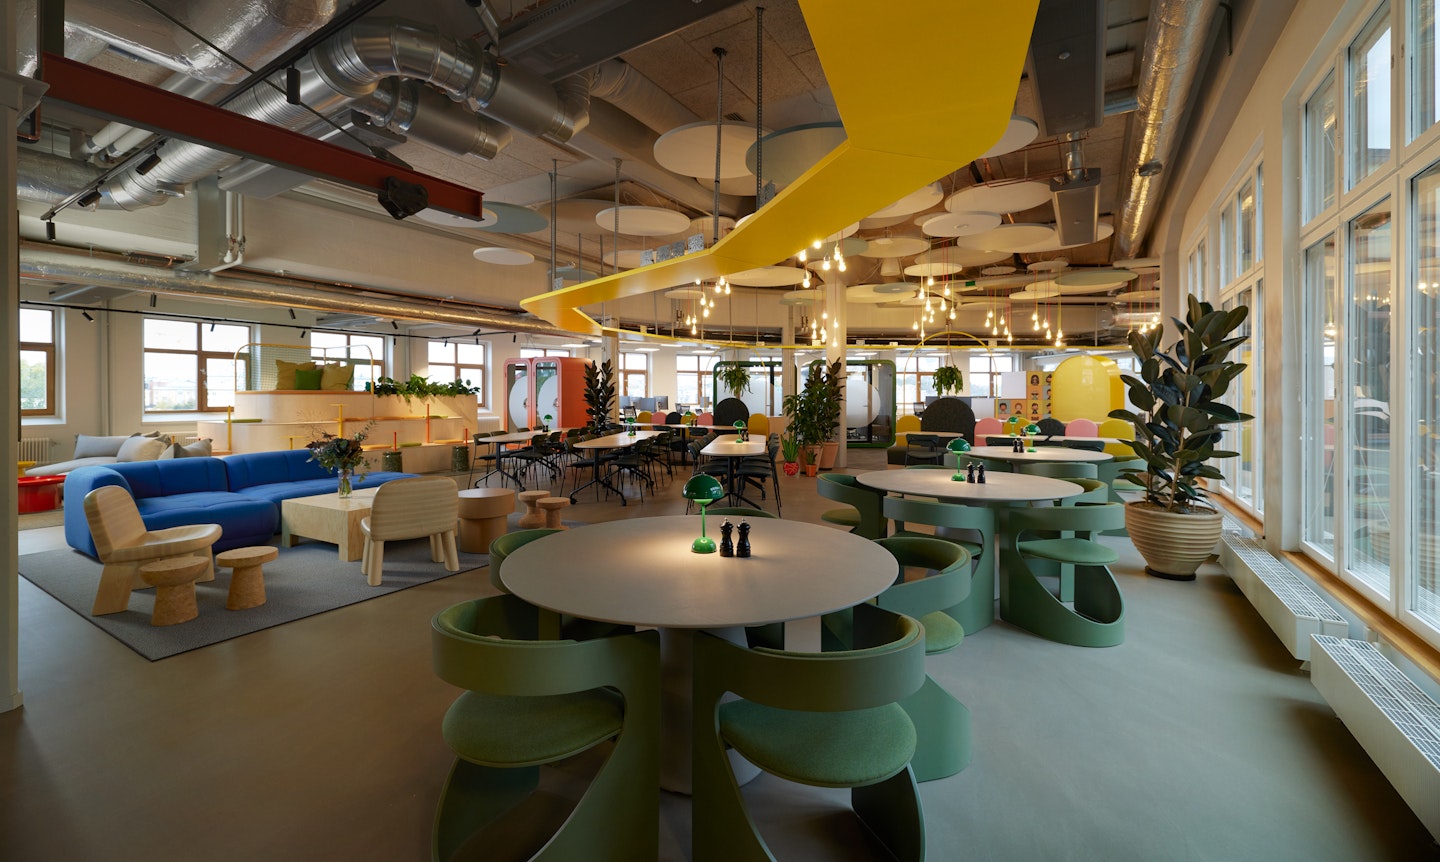 This is a photo of Toca Boca Campus. It is a wide open space with playful furniture and looks to be an exciting and playful place to eat lunch. There is a yellow wooden track on the ceiling and industrial pipes also. The colors are bright and playful, with some beige wooden furniture also.